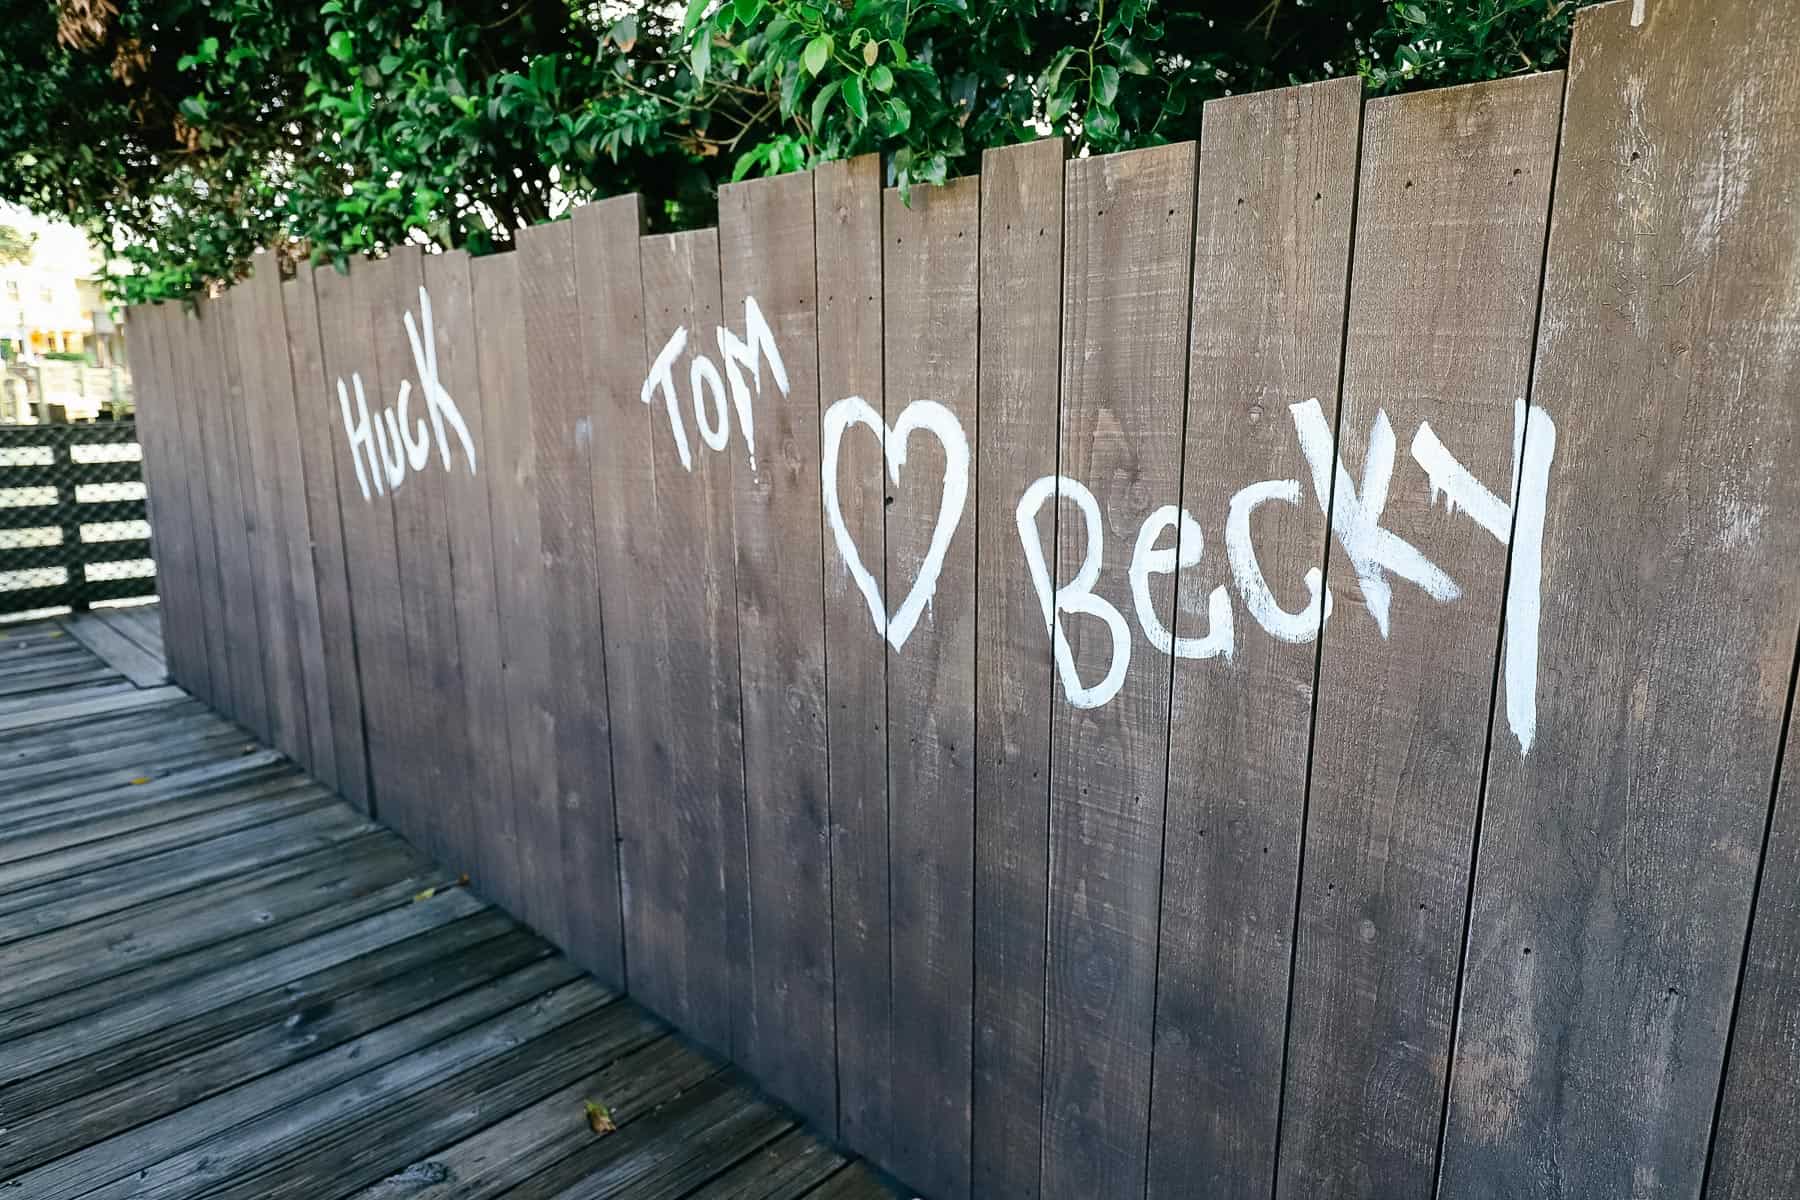 "Tom Loves Becky" painted on a fence 